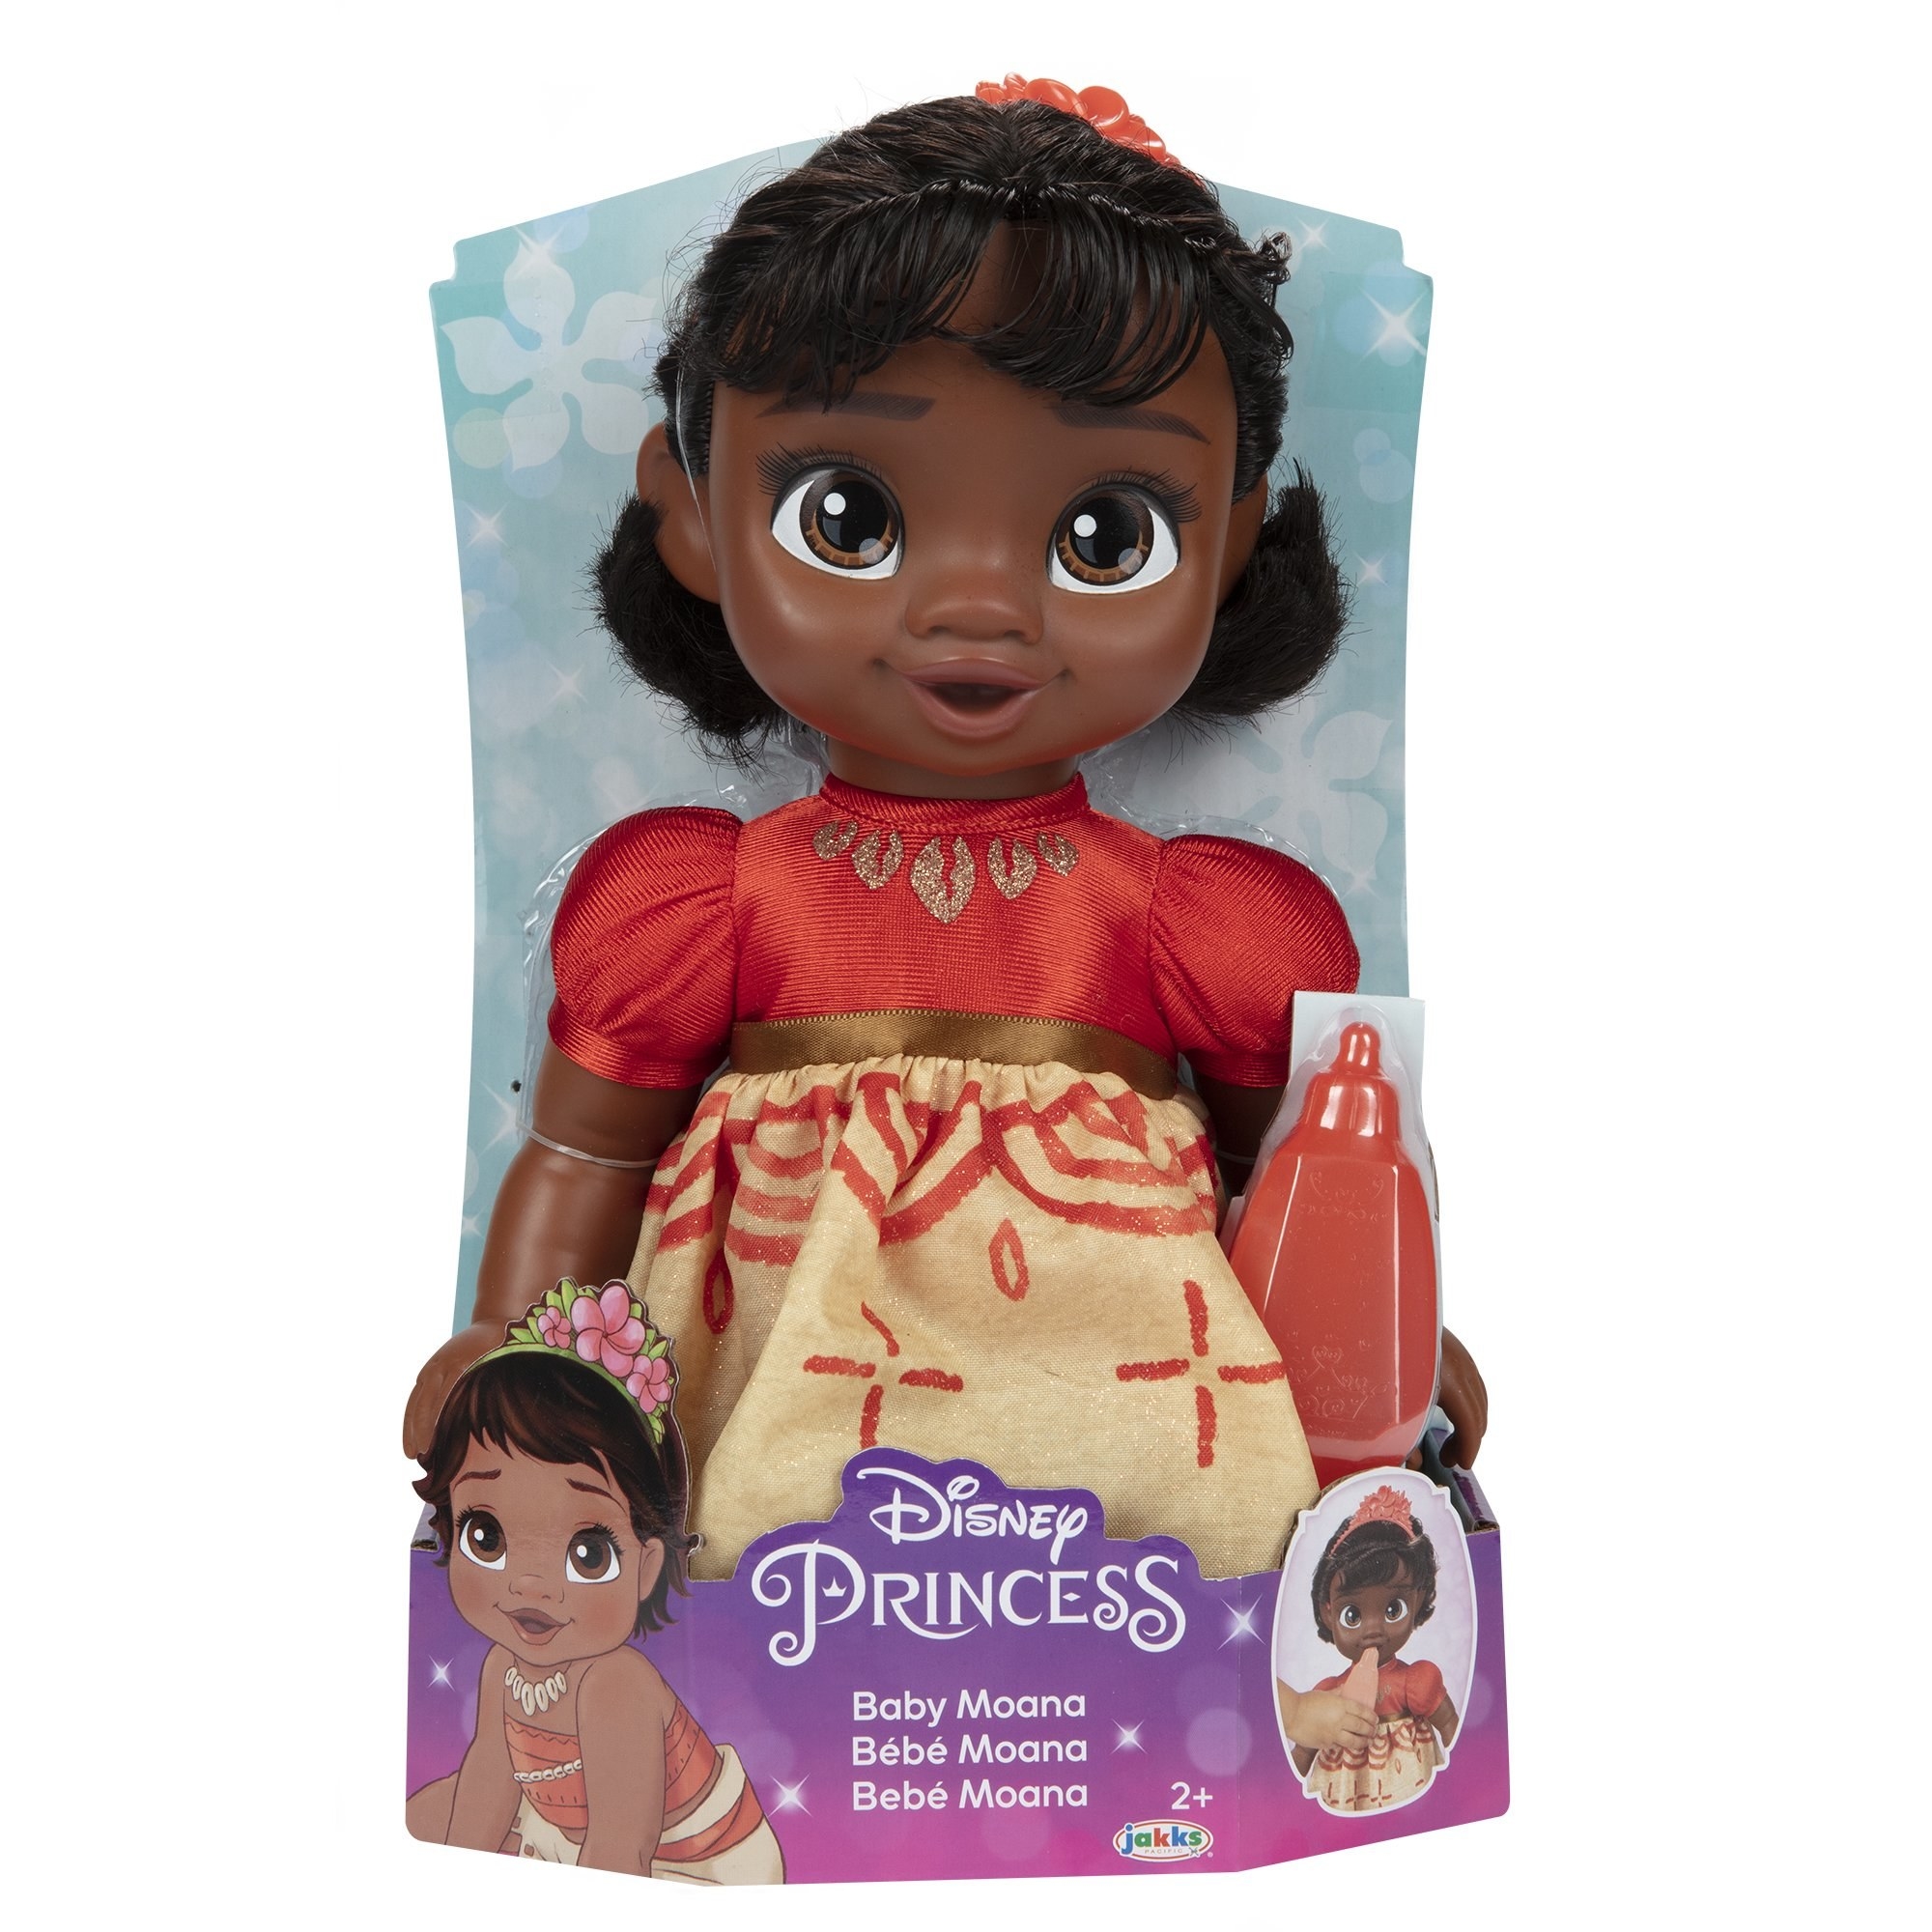 A Disney Baby Moana baby doll and baby bottle in packaging